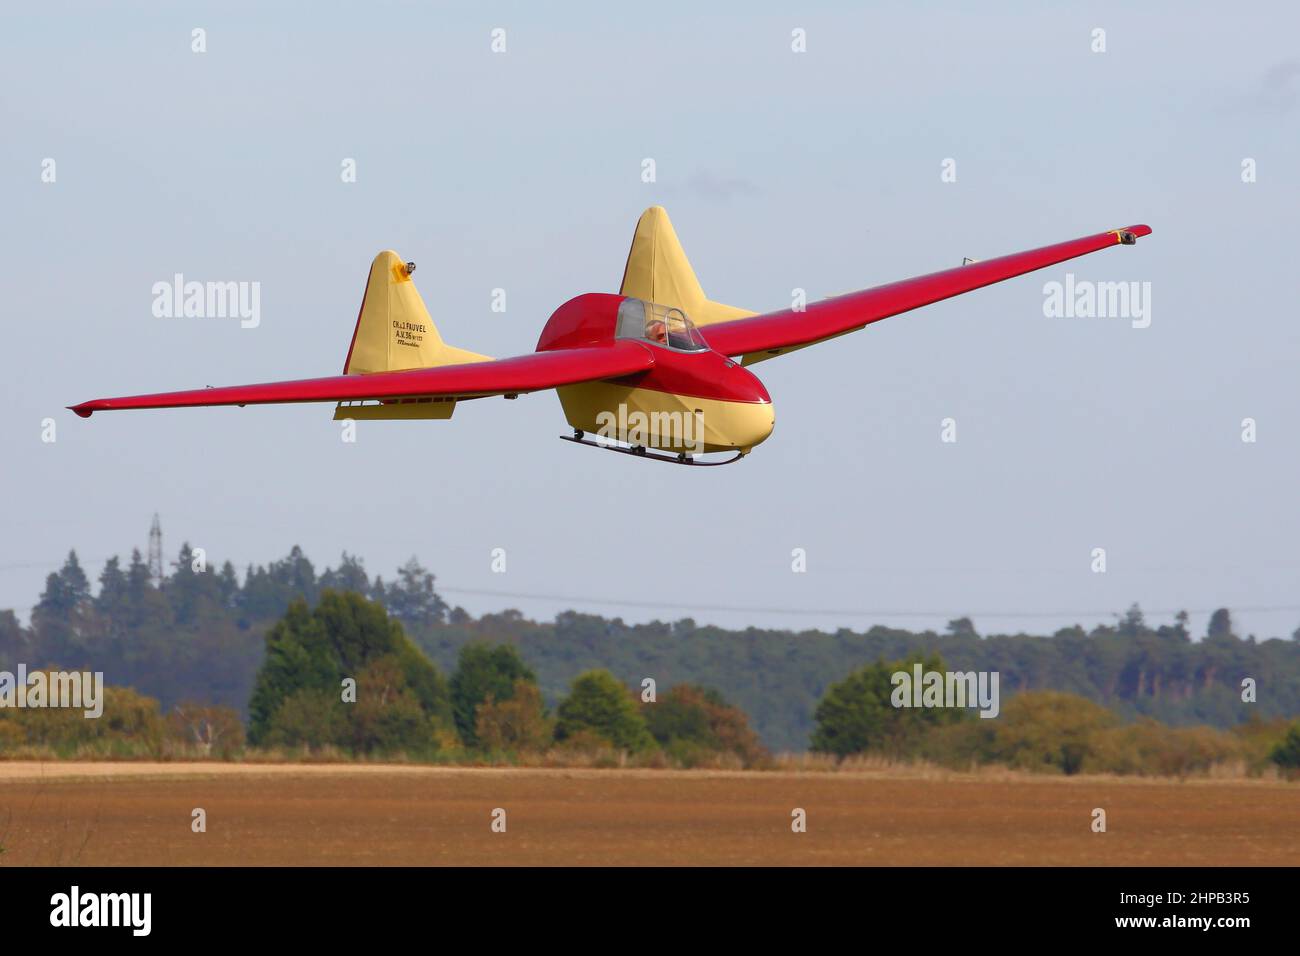 The Fauvel AV.36 was a single-seat tailless glider designed in France in the 1950s by Charles Fauvel at Old Warden Stock Photo